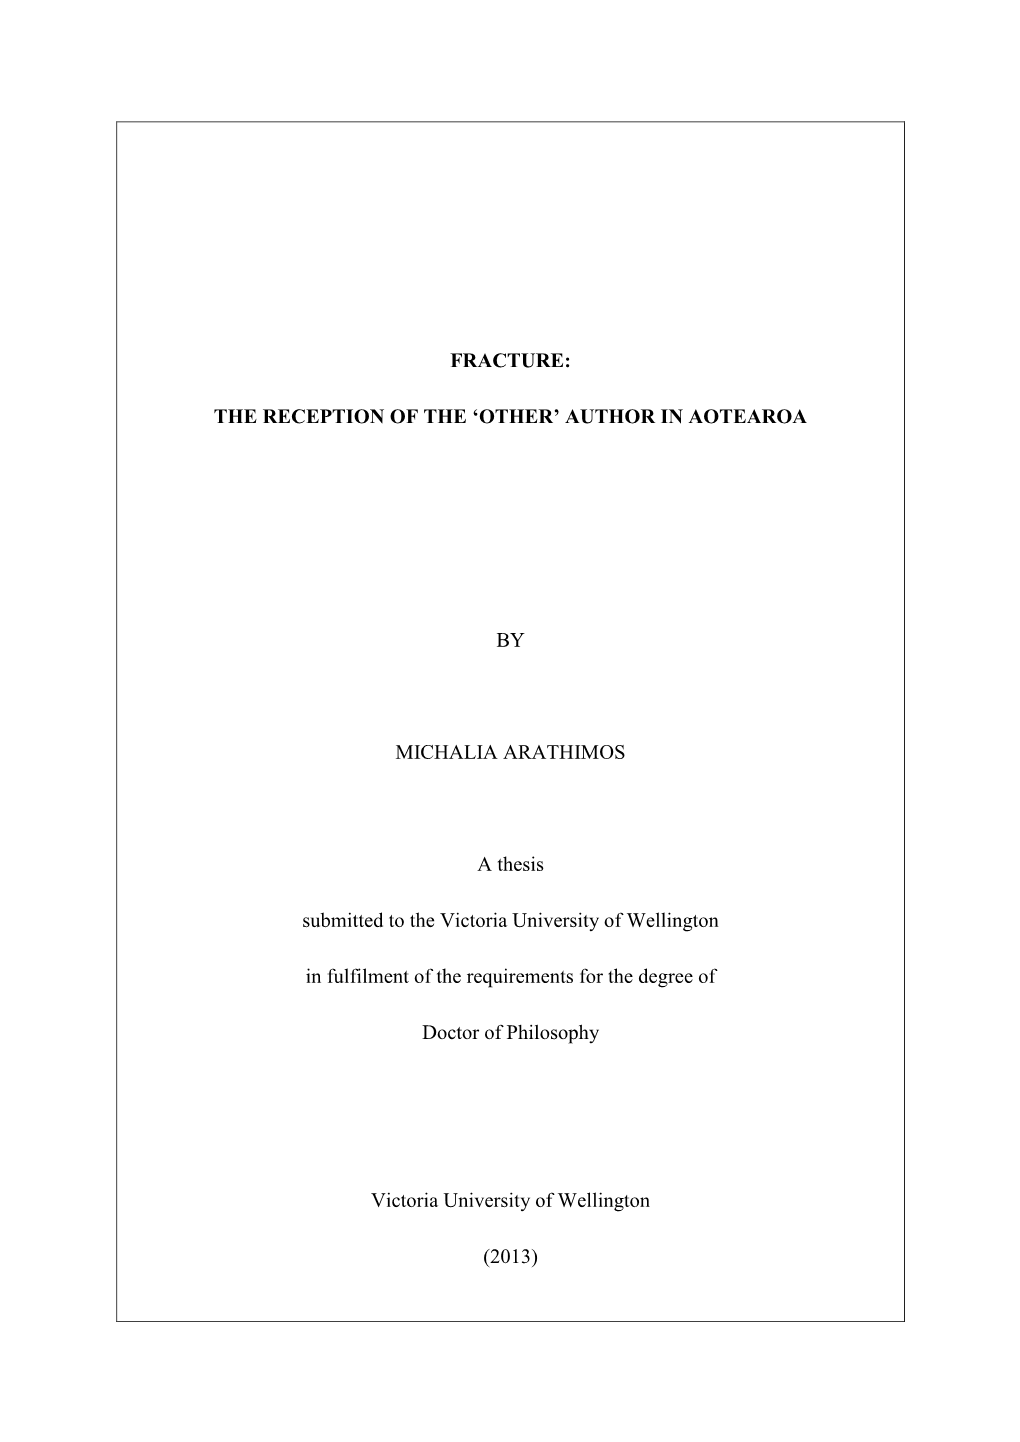 'OTHER' AUTHOR in AOTEAROA by MICHALIA ARATHIMOS a Thesis